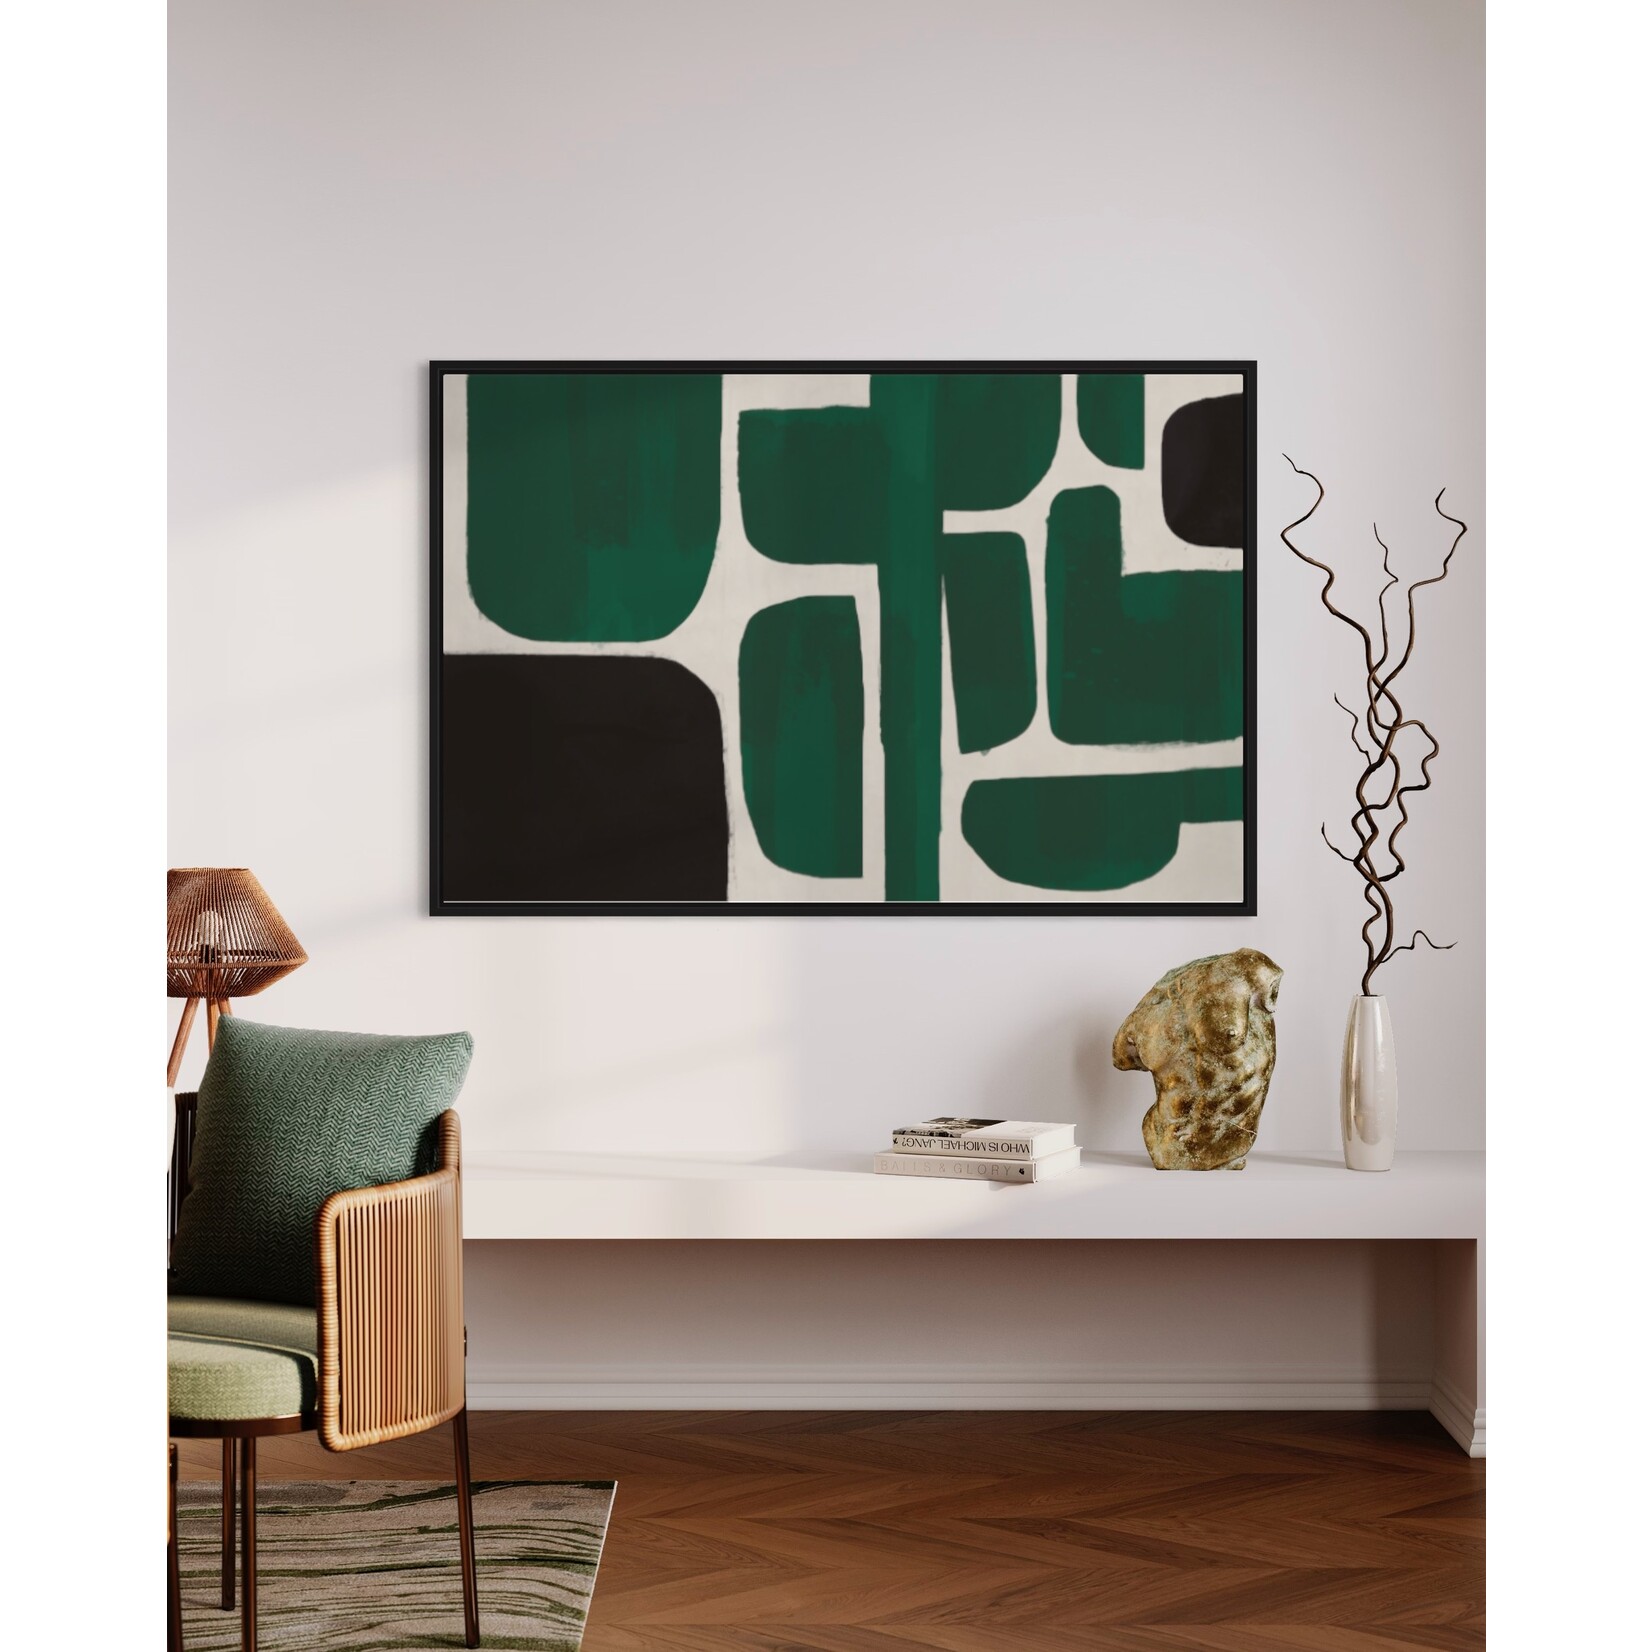 The Picturalist | Stretched Print on Canvas Composicion in Green and Black by Alejandro Franseschini